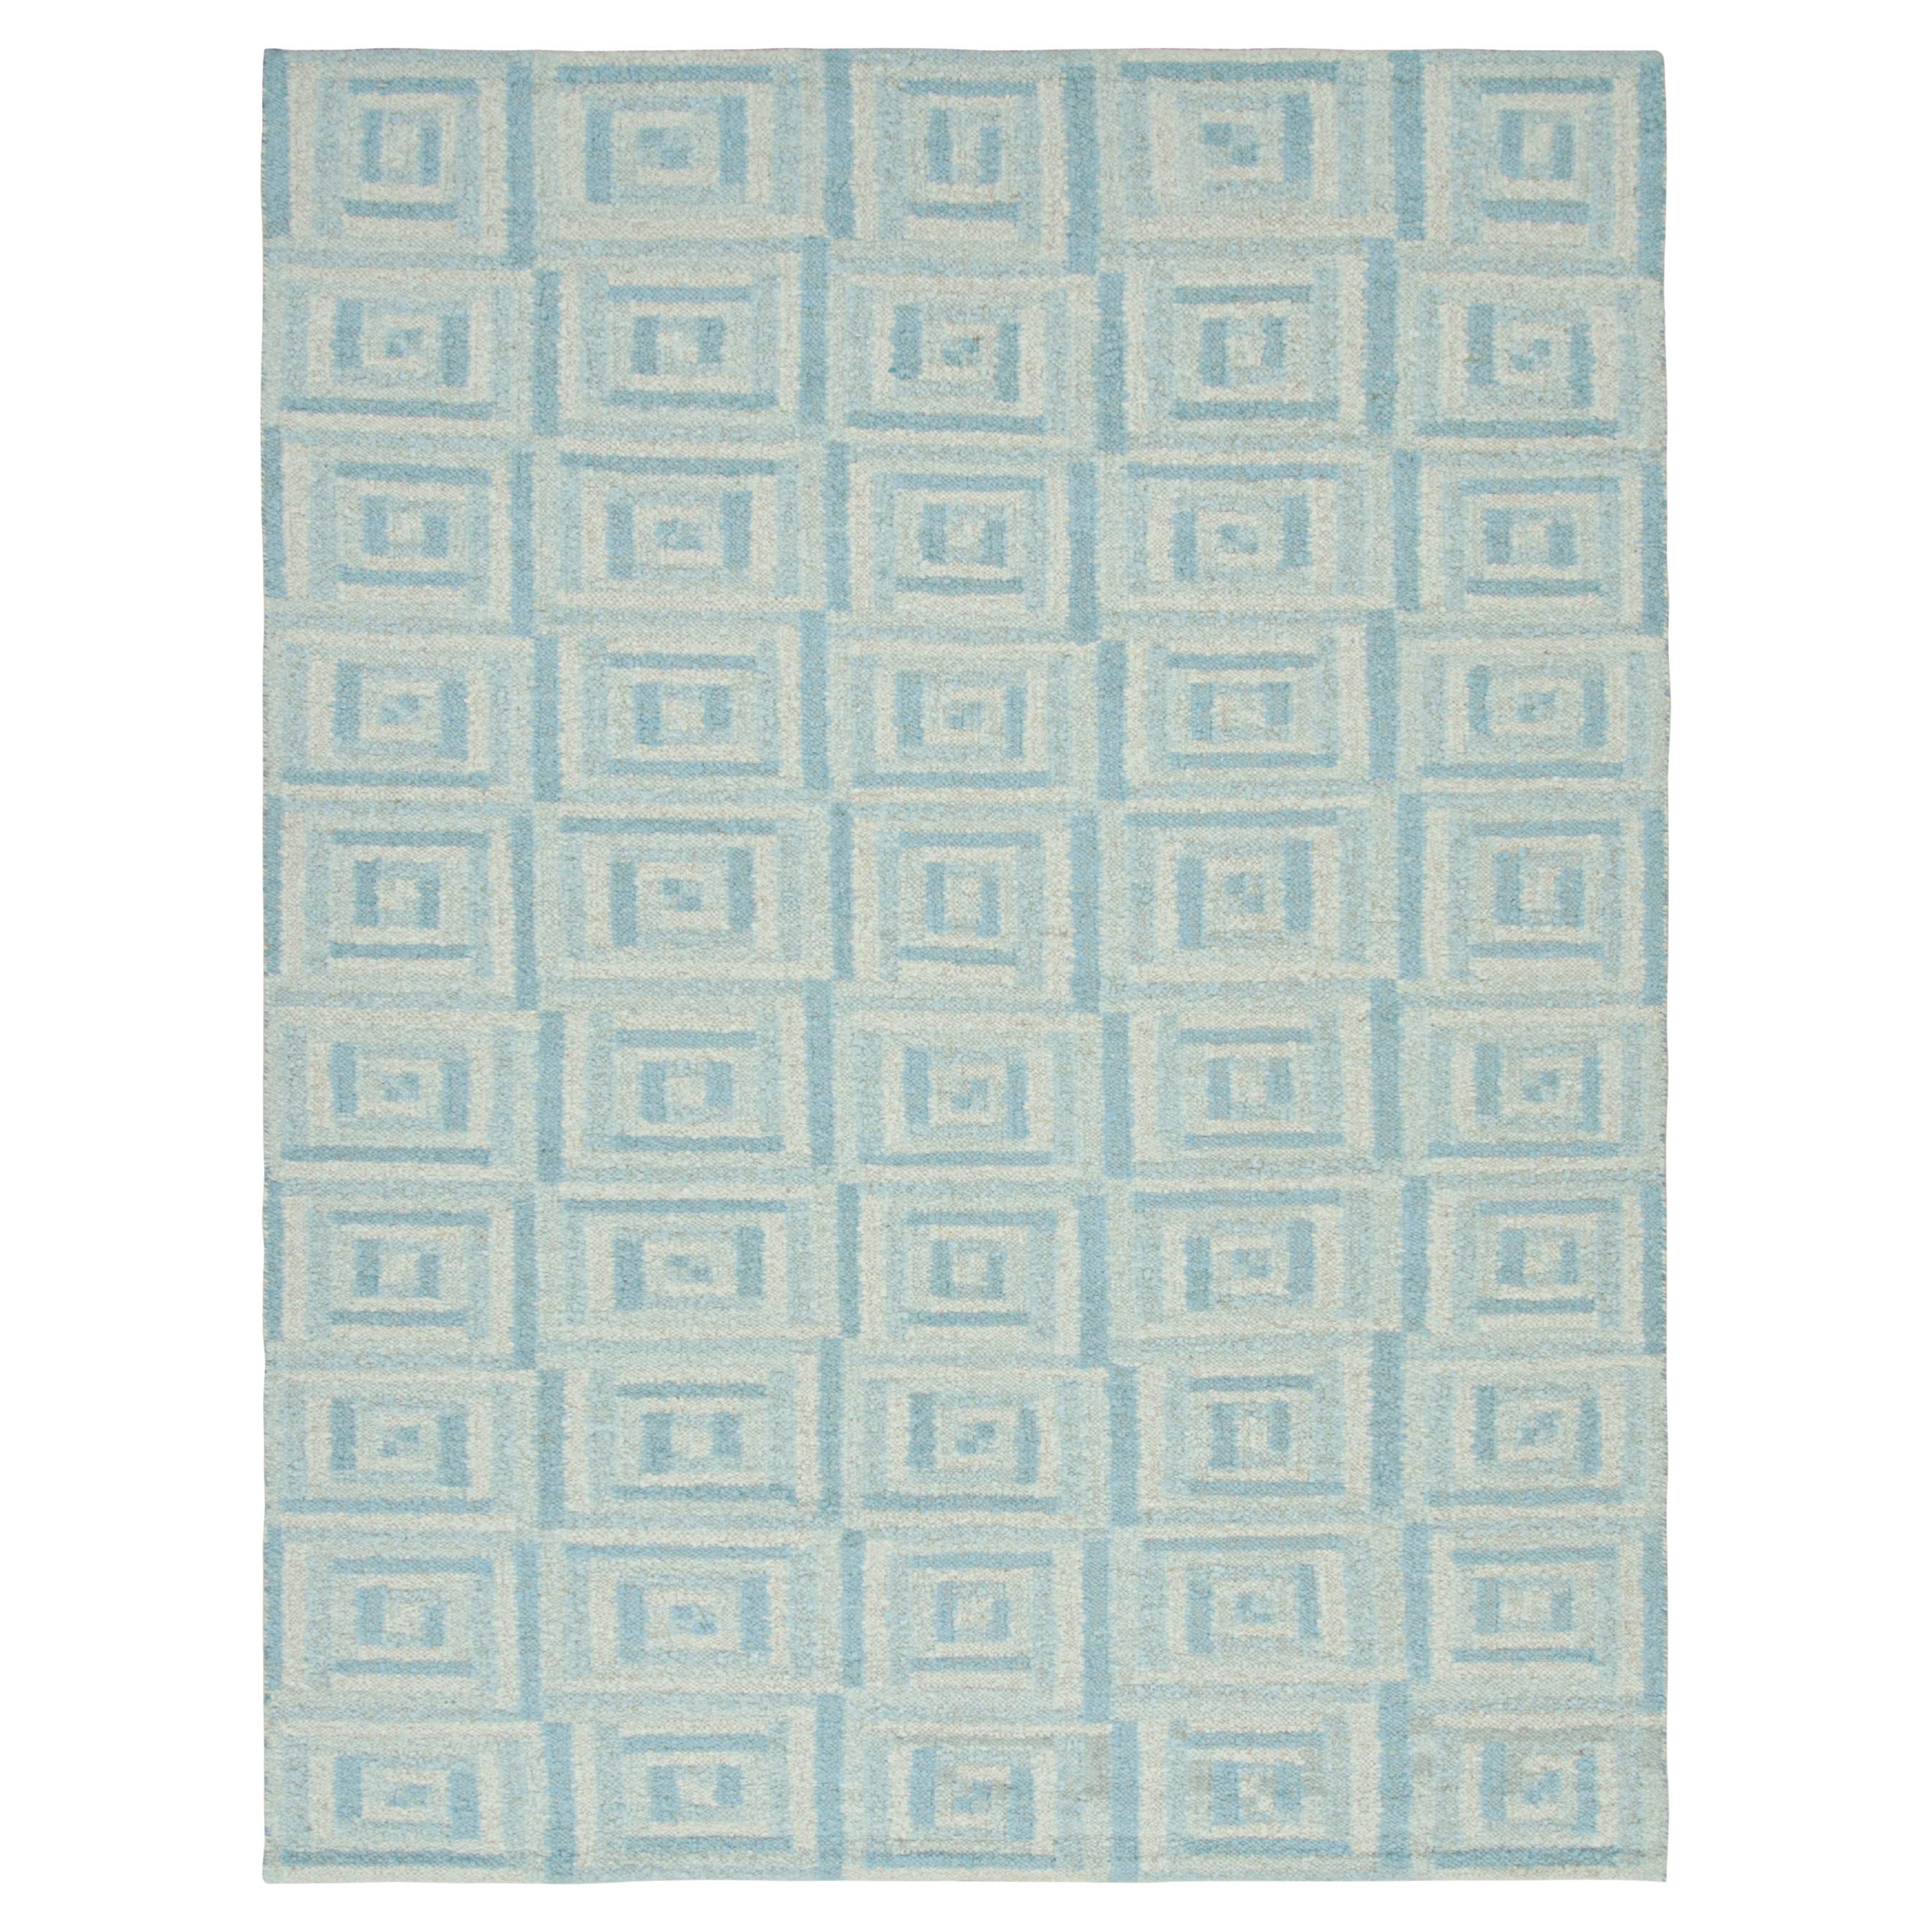 Rug & Kilim’s Scandinavian Style Rug with Light blue and White Geometric Pattern